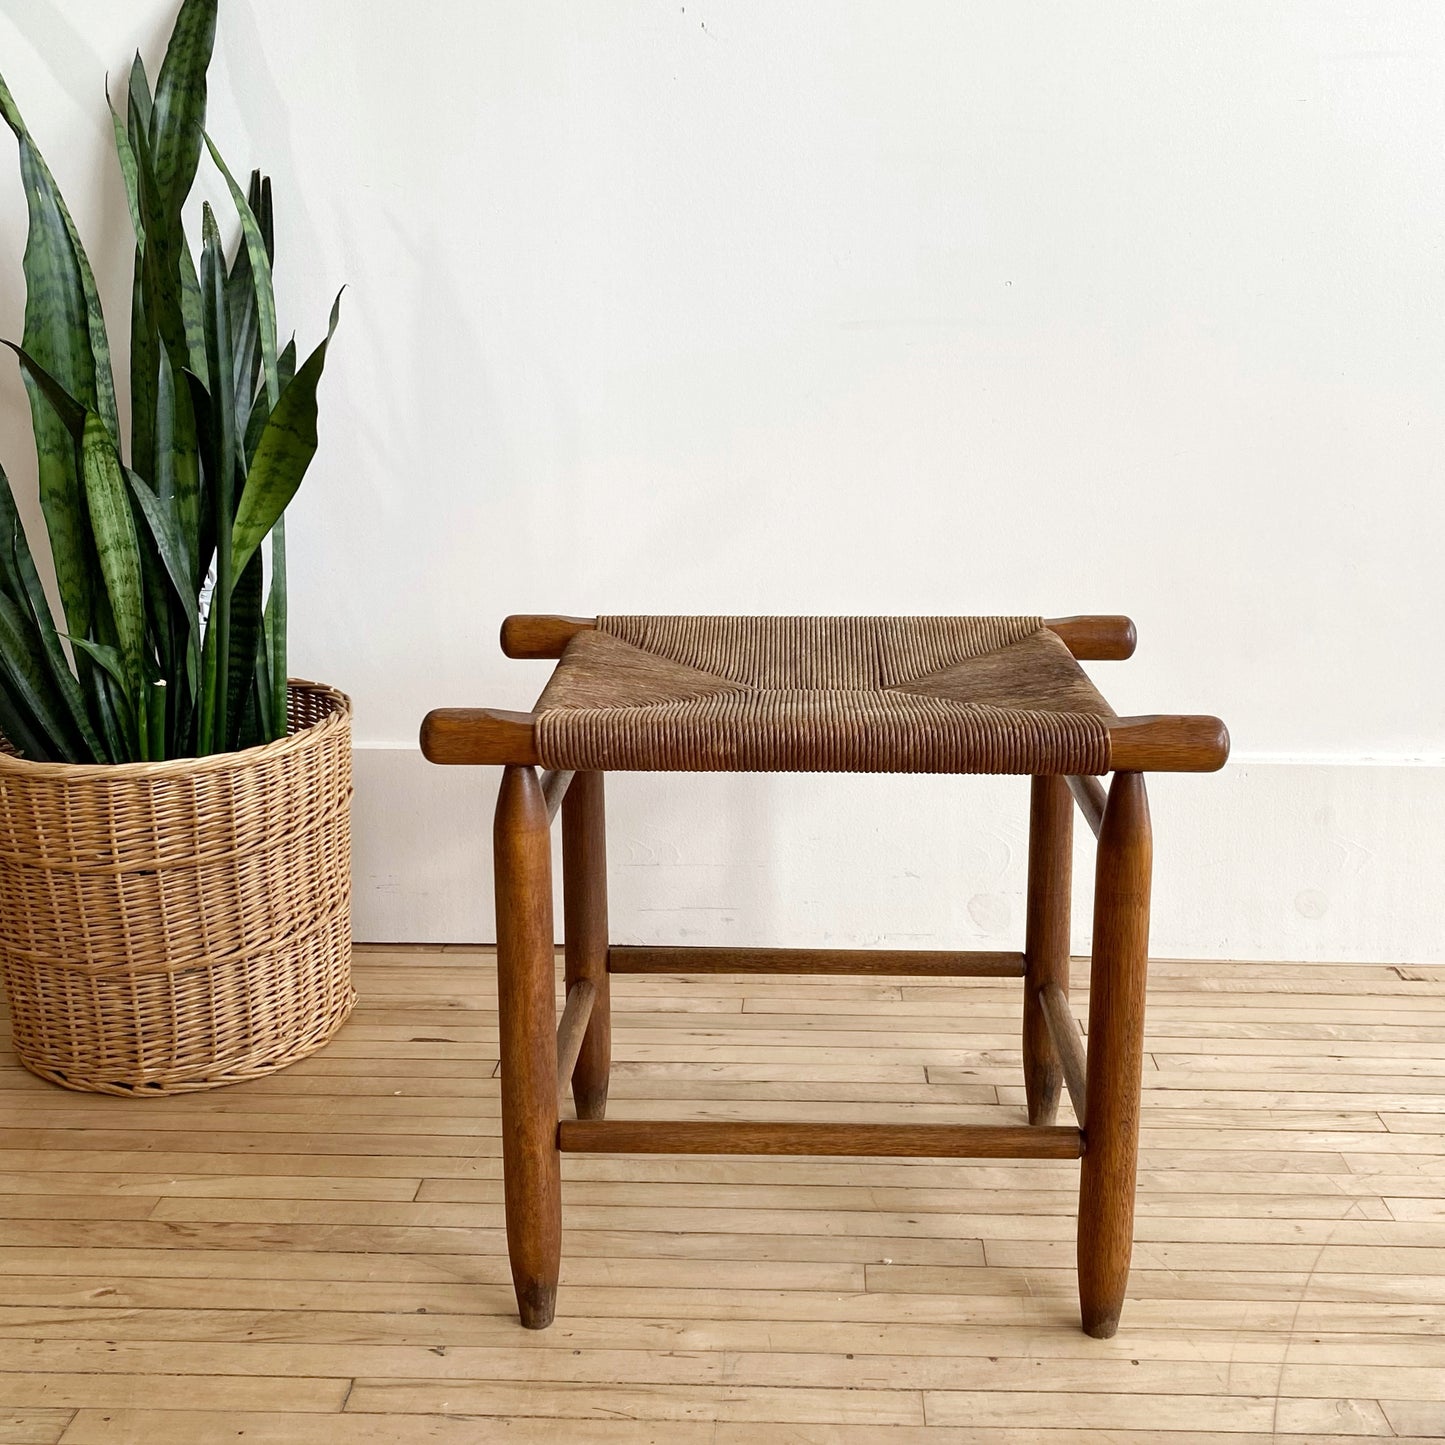 Found Antique Handwoven Paper Cord Stool